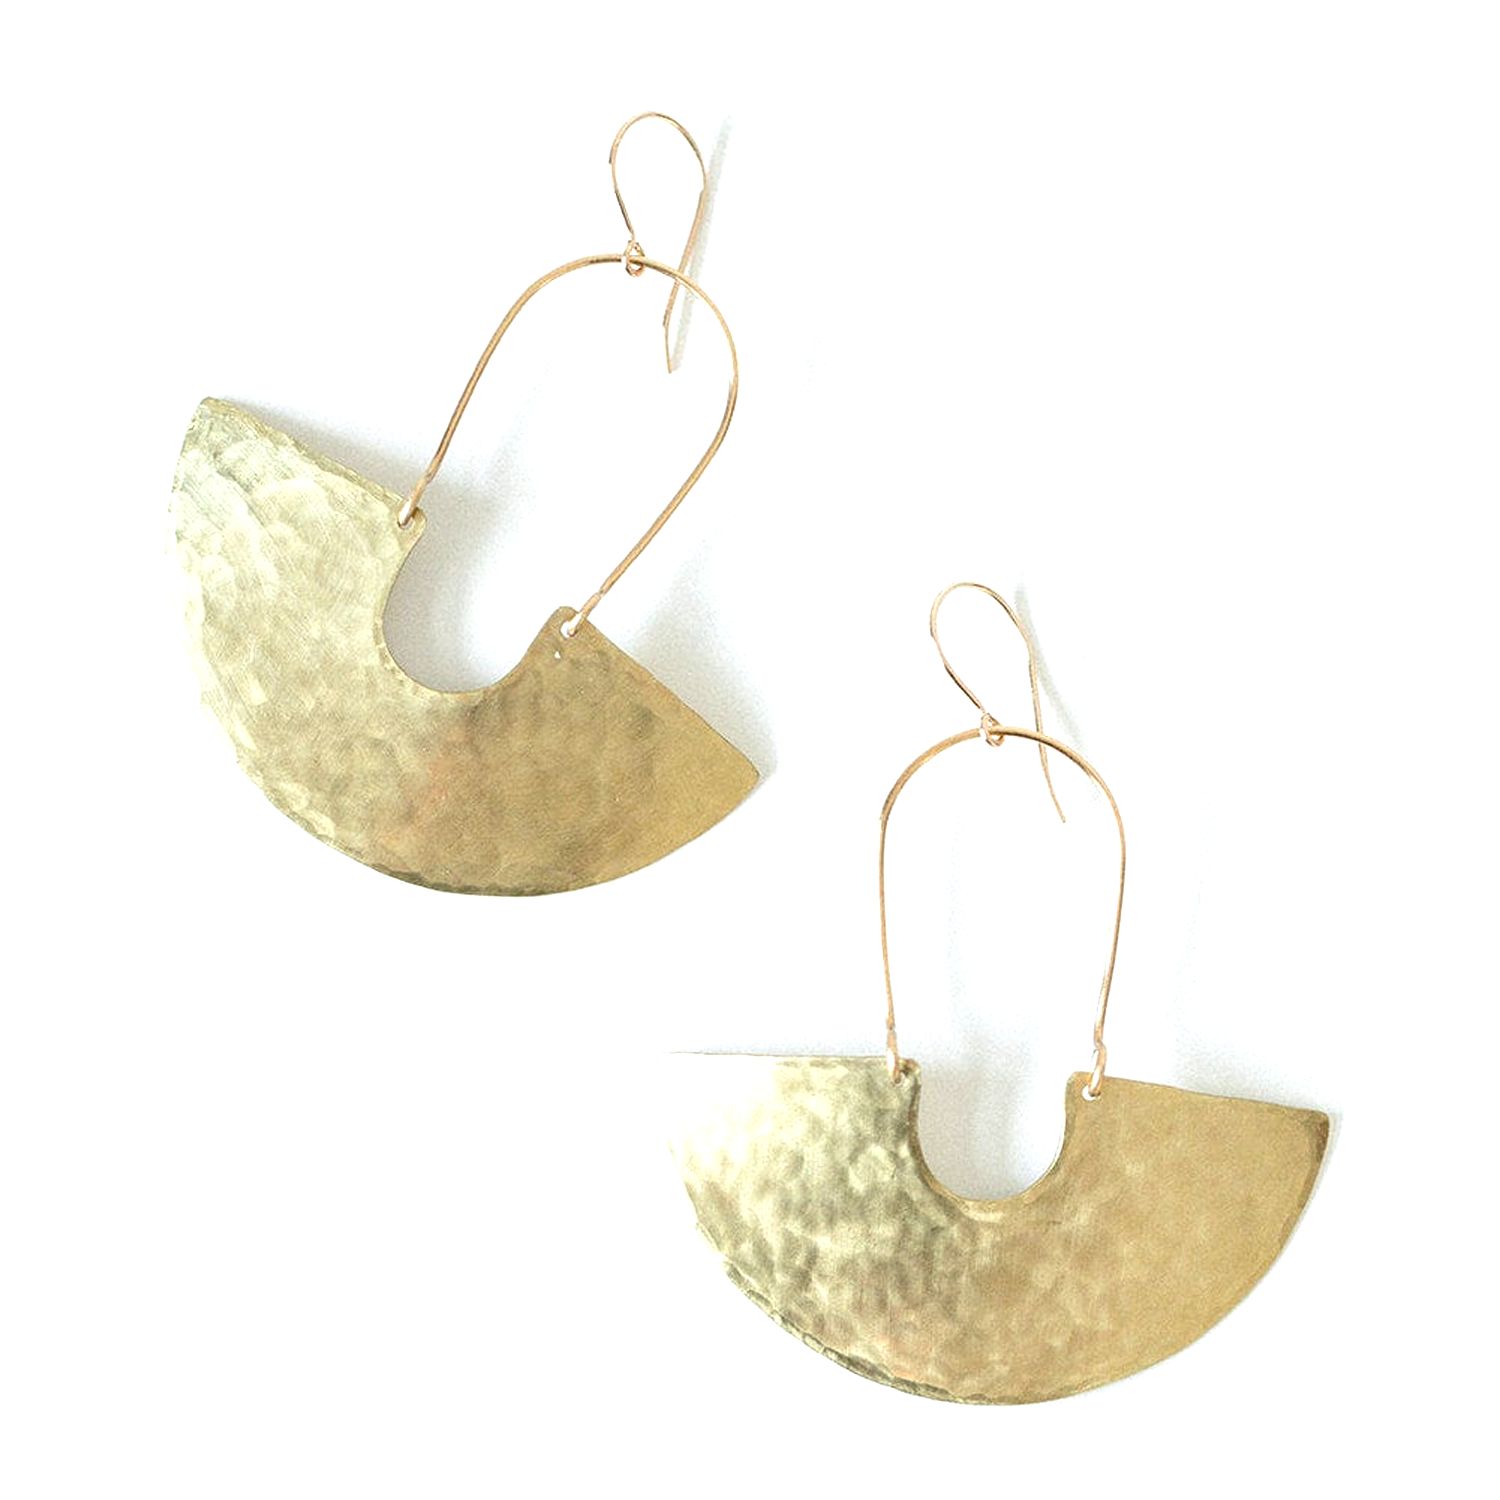 Enarmoured: Brass Goddess Shield Textured Earrings Product Image 1 of 2